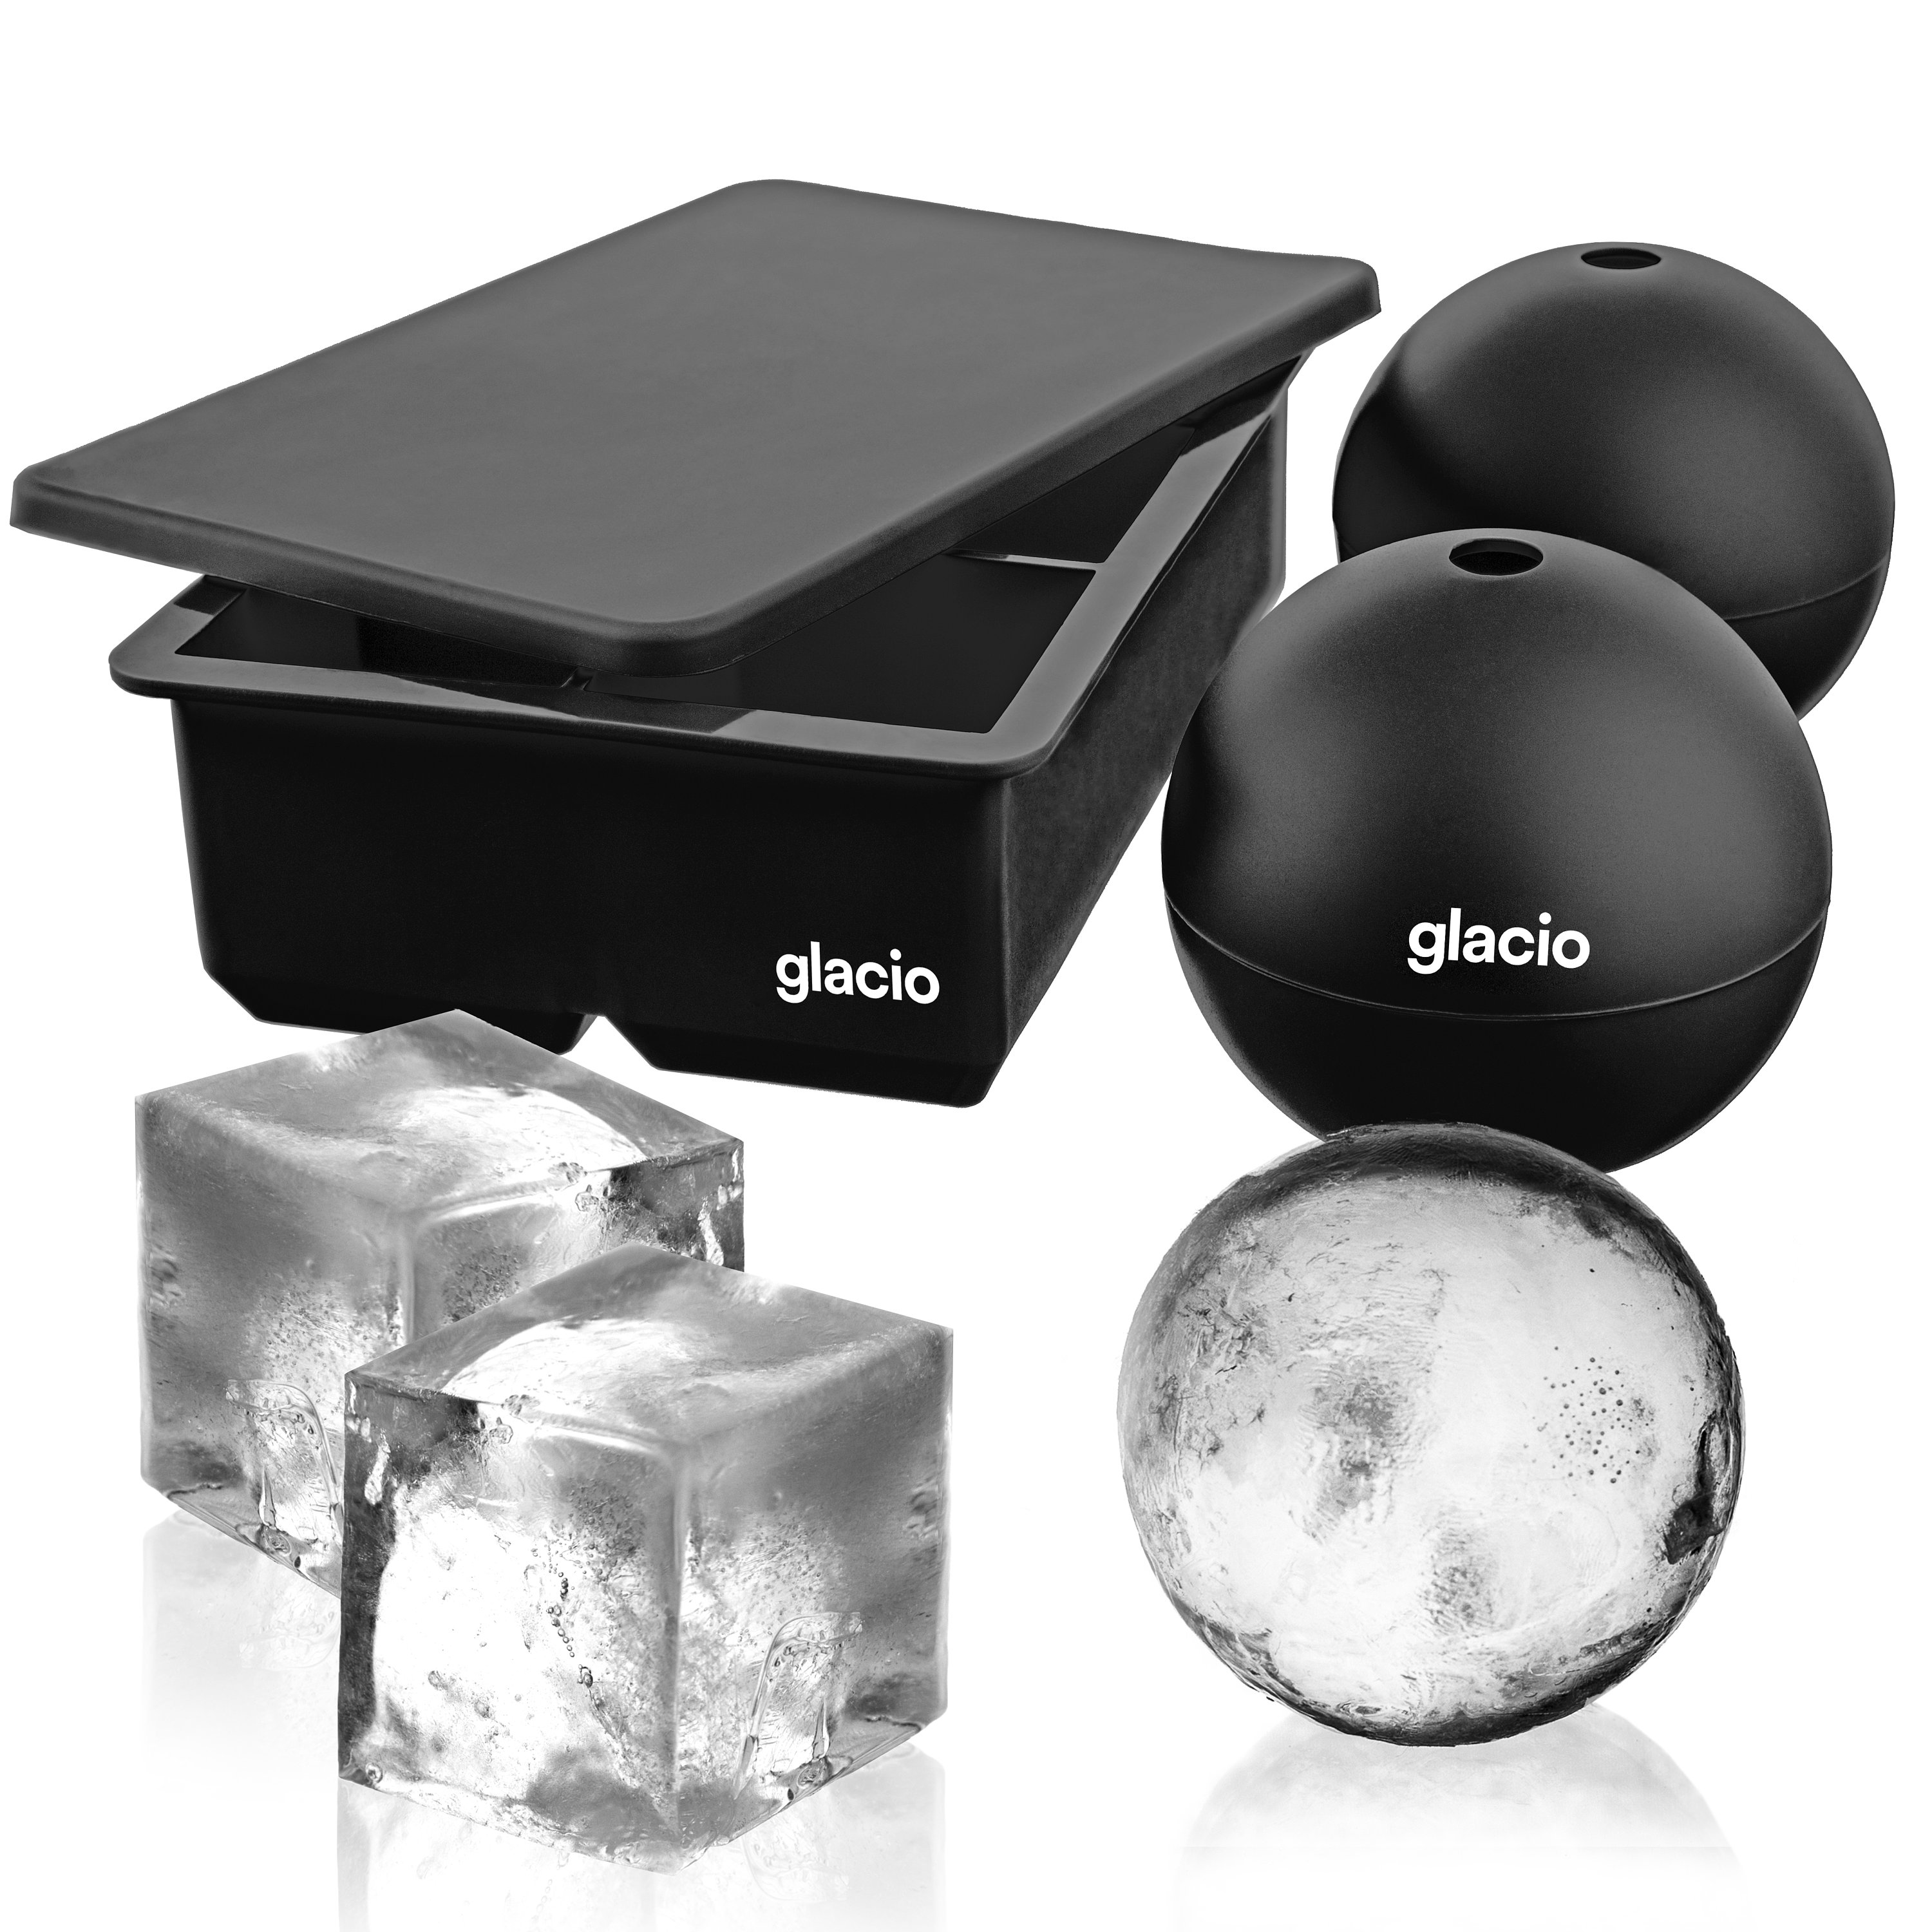 Glacio Large Sphere Ice Mold Tray Whiskey Ice Sphere Maker Makes